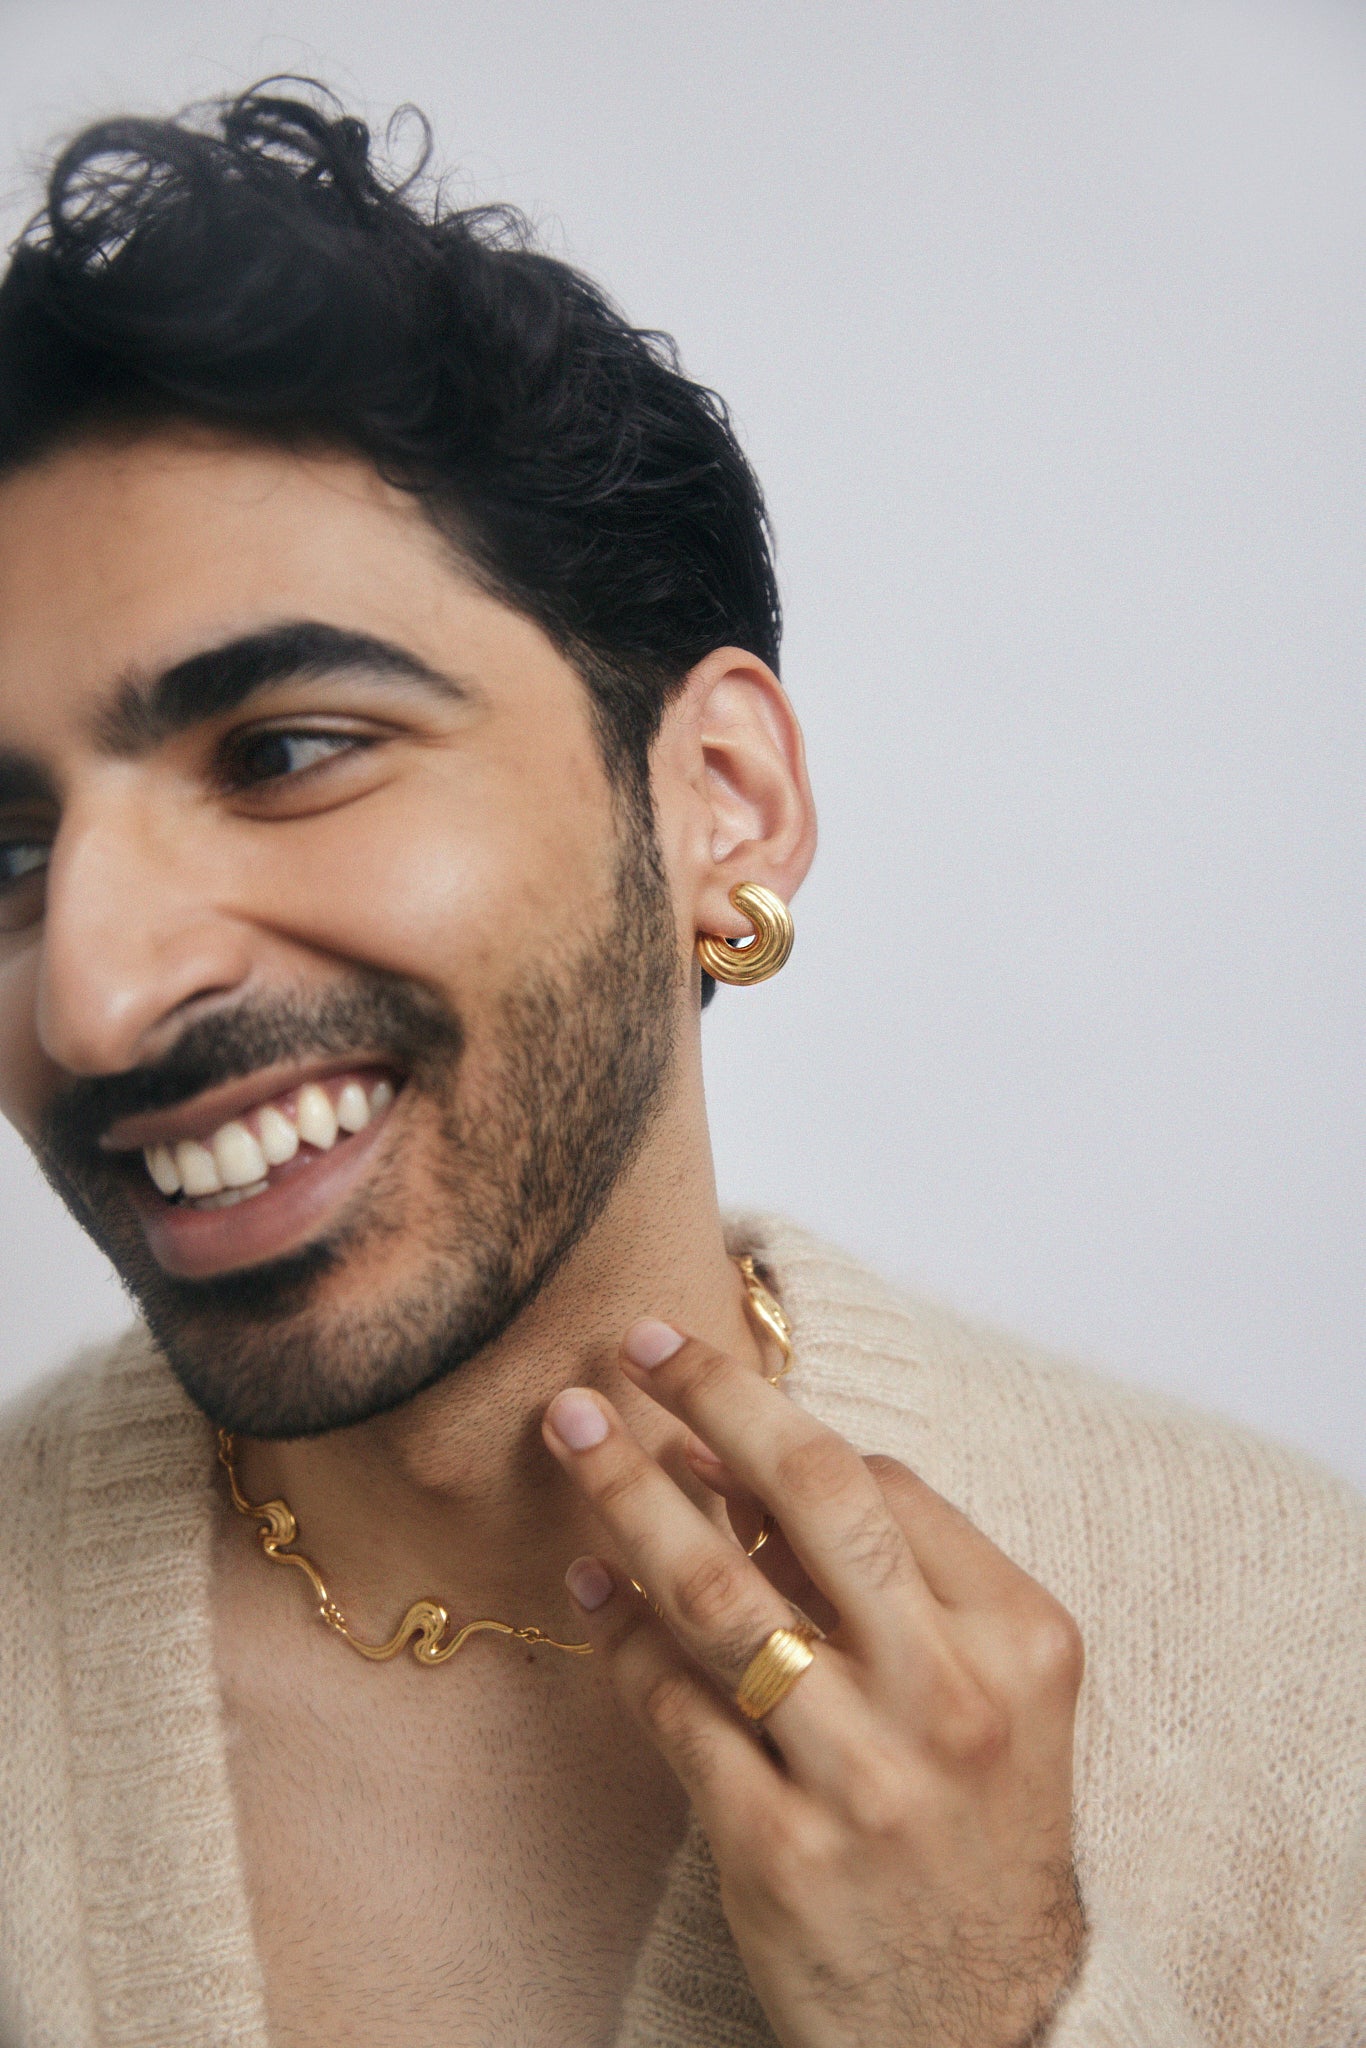 Male model wearing gold jewelry, smiling